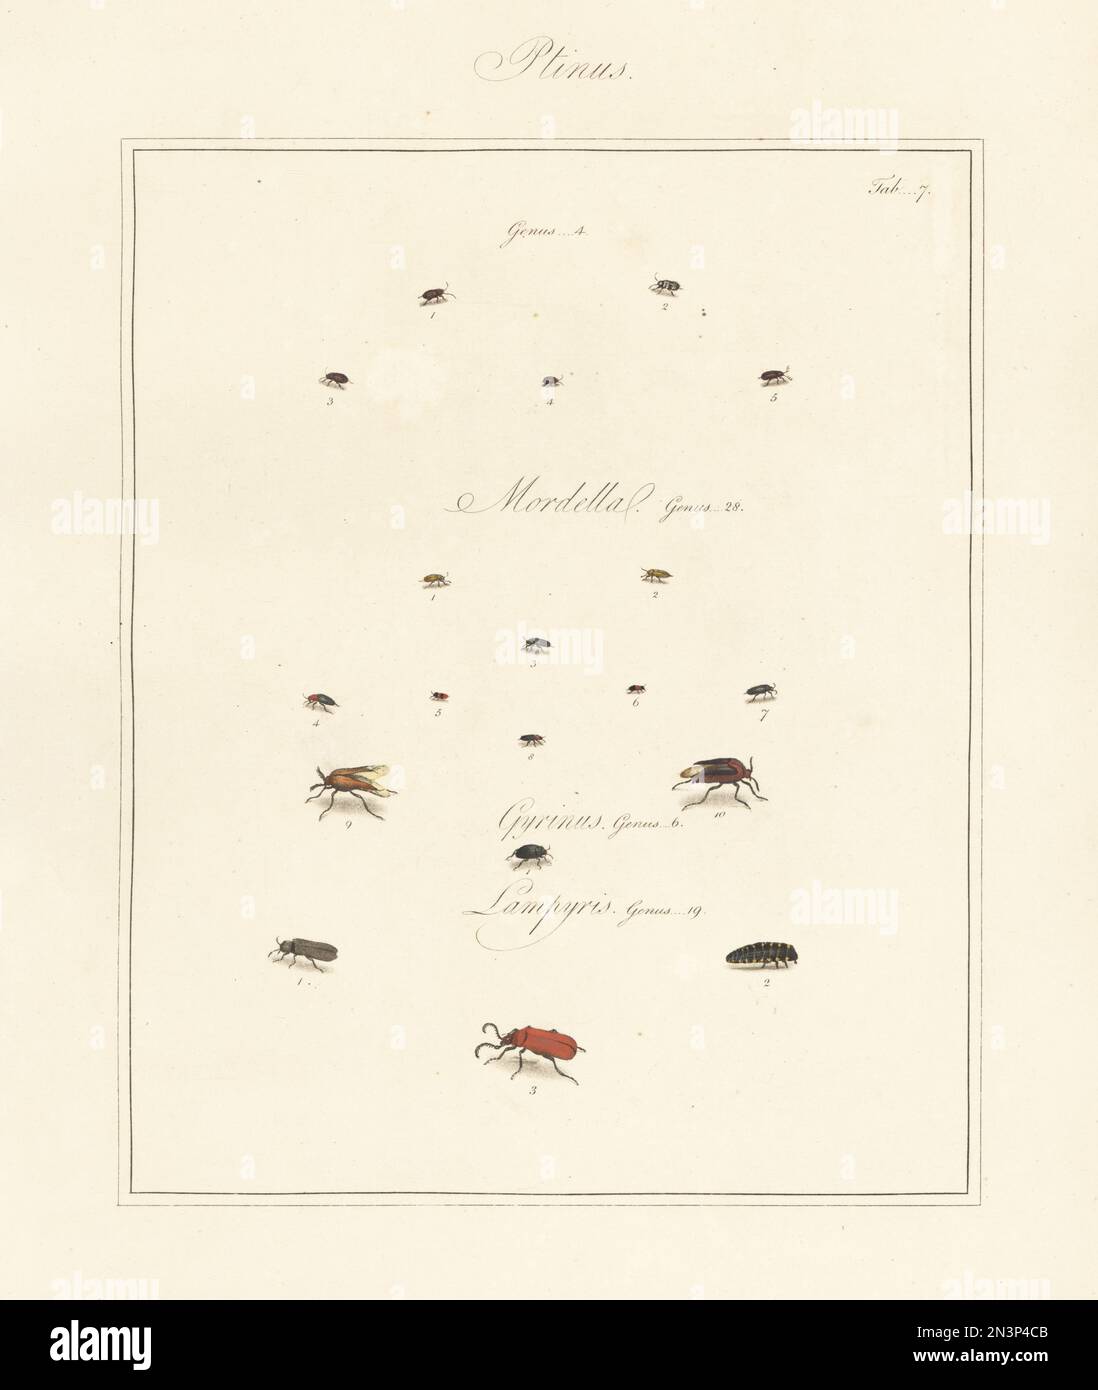 White-marked spider beetle, Ptinus fur 13,4, P. imperialis 2, P. pectinicornis 5, tumbling flower beetle, Mordella aculeata 3, Mordellochroa abdominalis 4, frontalis 7, paradoxa 9,10, whirligig beetle, Gyrinus natator 1, glow worm, Lampyris noctiluca 1,2, cardinal beetle, Pyrochroa species 3. Handcoloured copperplate engraving from Thomas Martyn’s The English Entomologist, Exhibiting all the Coleopterous Insects found in England, Academy for Illustrating and Painting Natural History, London, 1792. Stock Photo